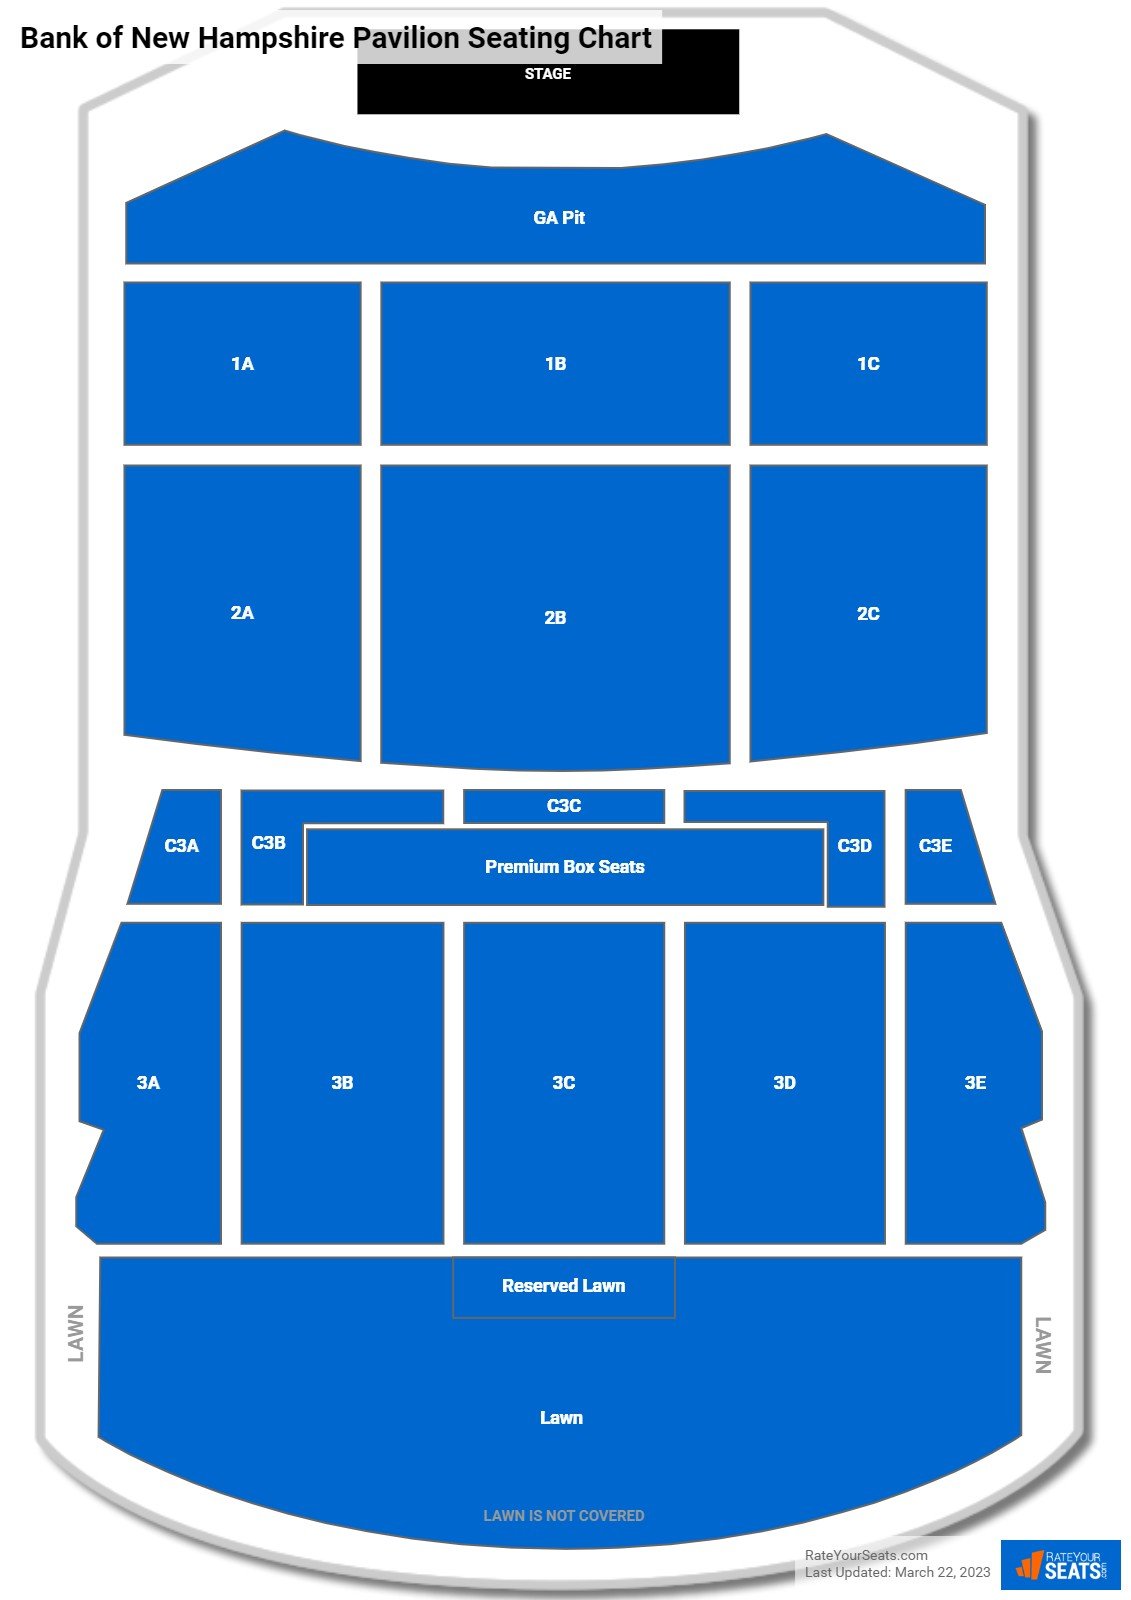 Bank of New Hampshire Pavilion Concert Seating Chart